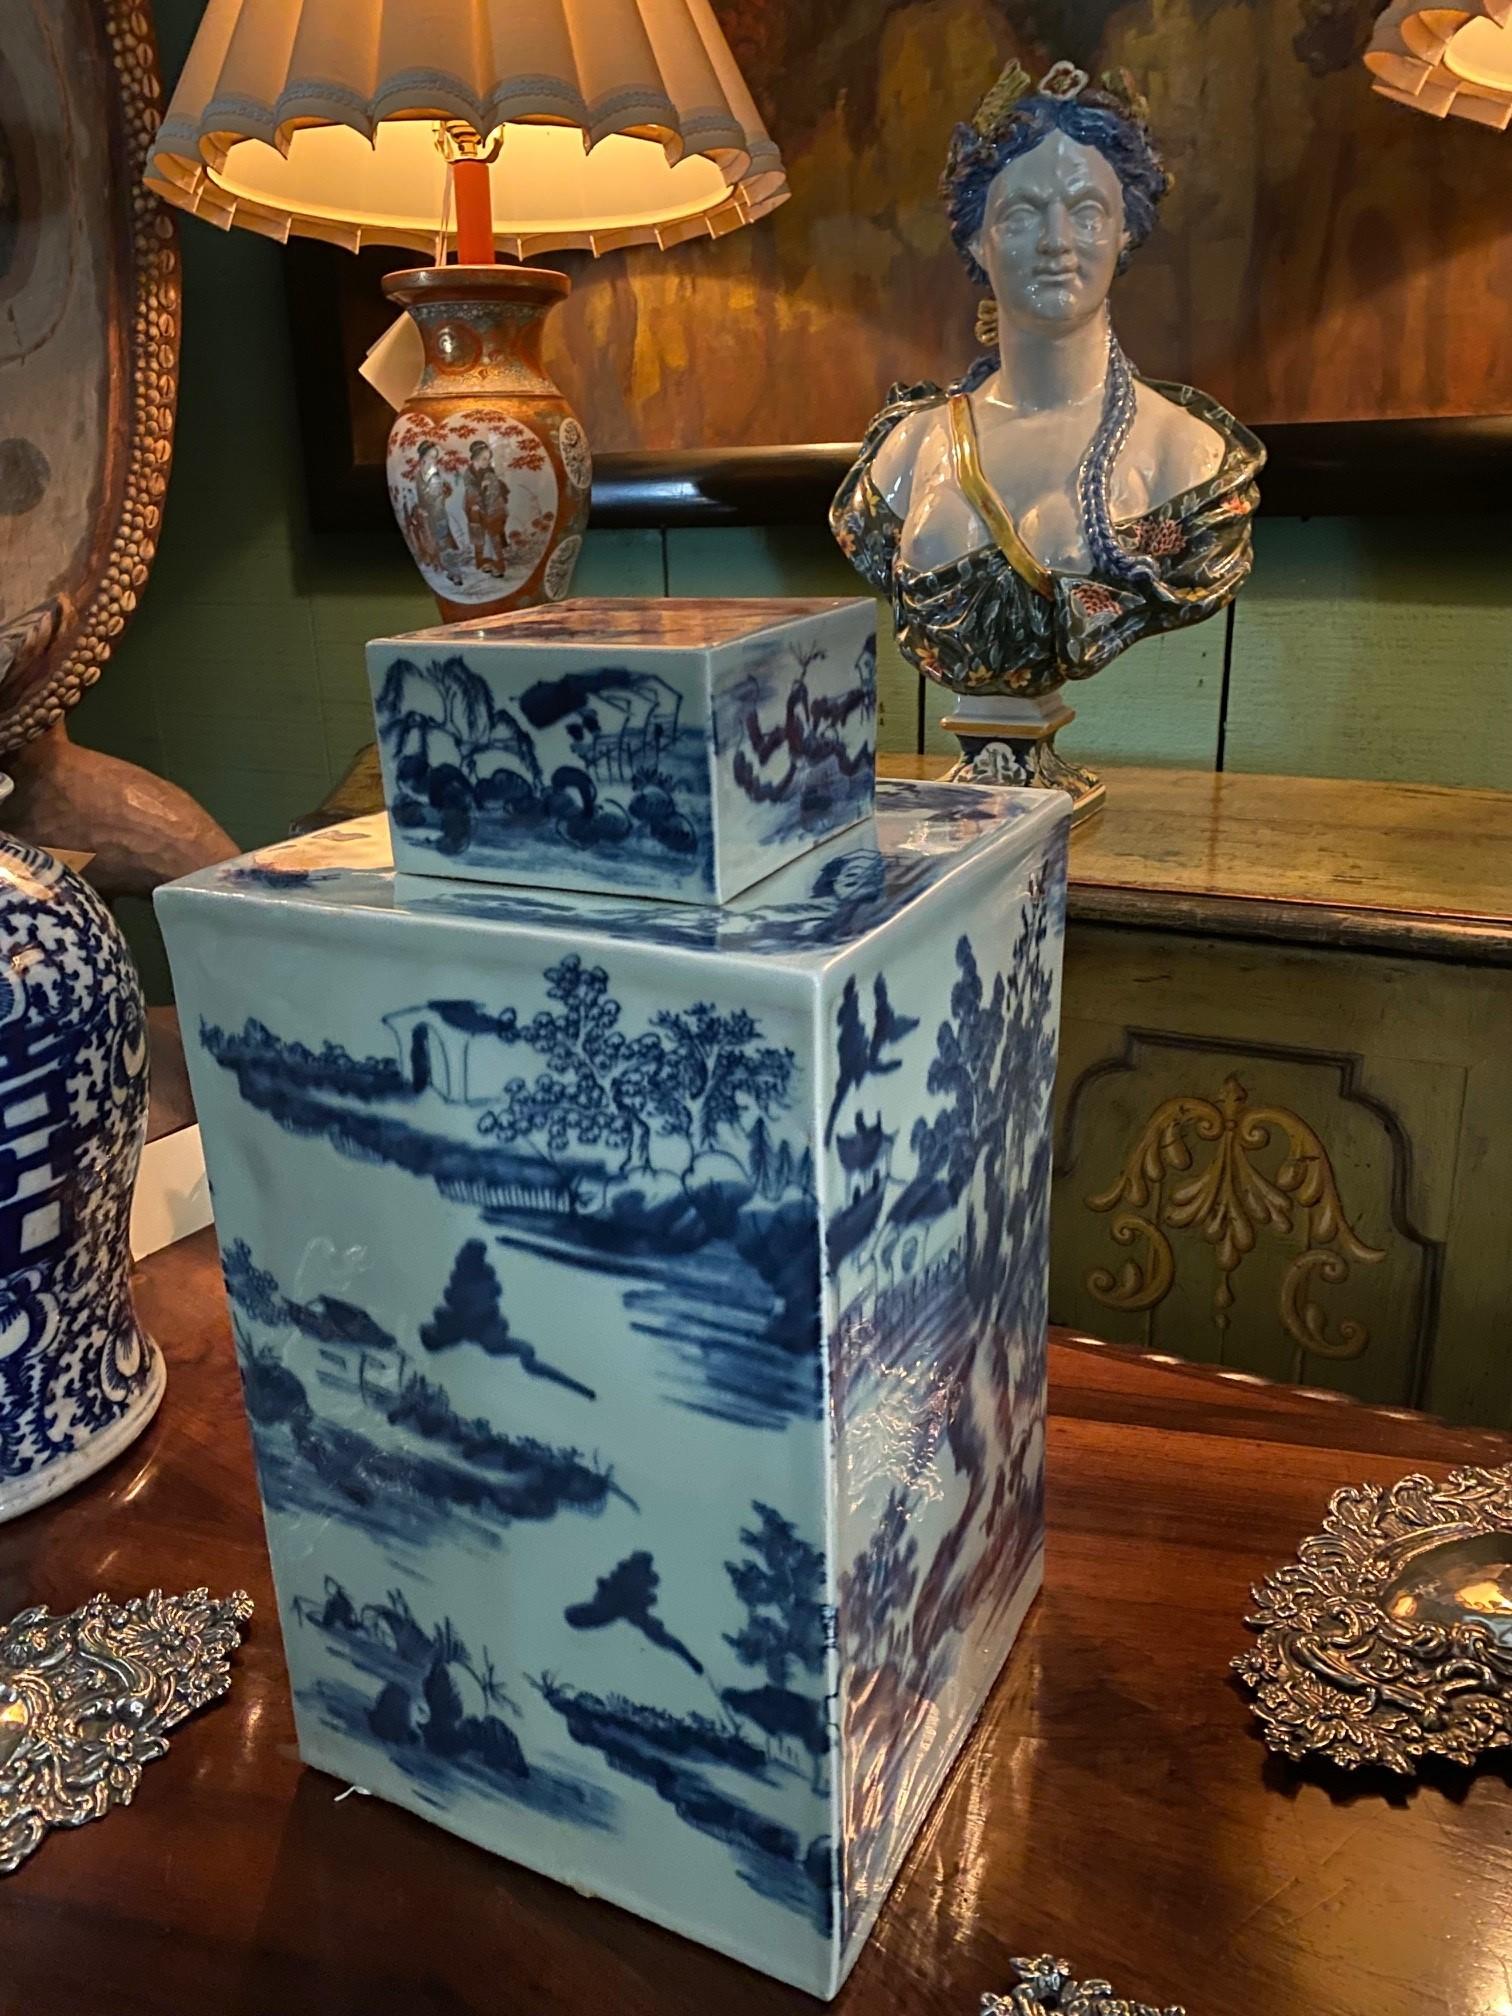 Square Chinese Celadon Indigo Porcelain Covered Jar Modern center piece Vase CA .Blue & White Celadon & Indigo Chinoiserie China Lidded Jar Antiques Depicting flowers and leaves water pond nature symbolizing happiness and vitality 
the Lid square